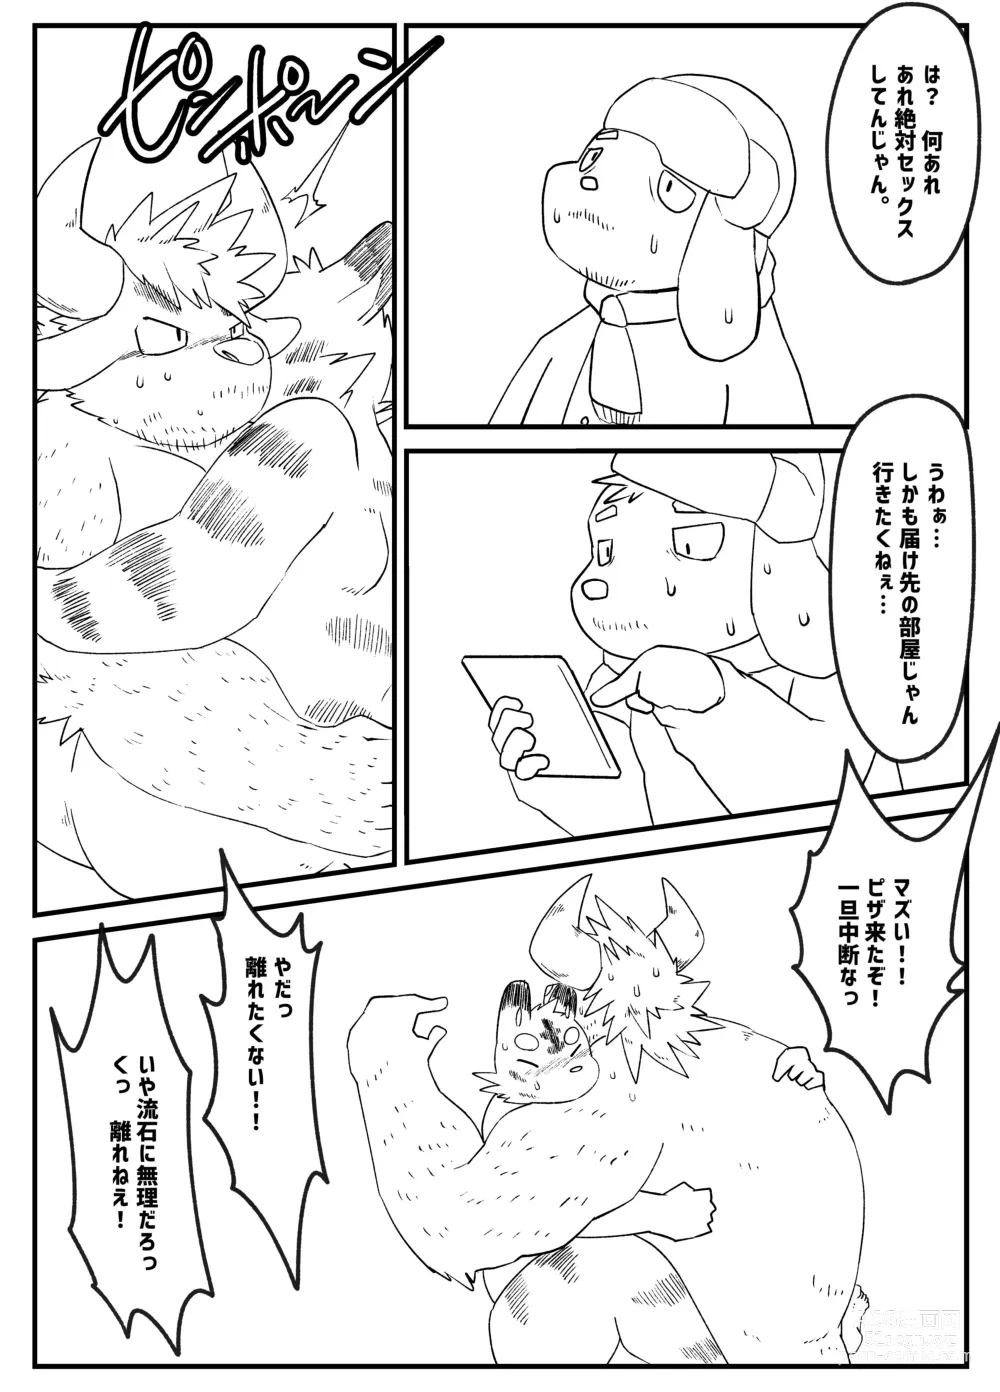 Page 7 of doujinshi Muscular Bull Teacher & Chubby Tiger Student 5